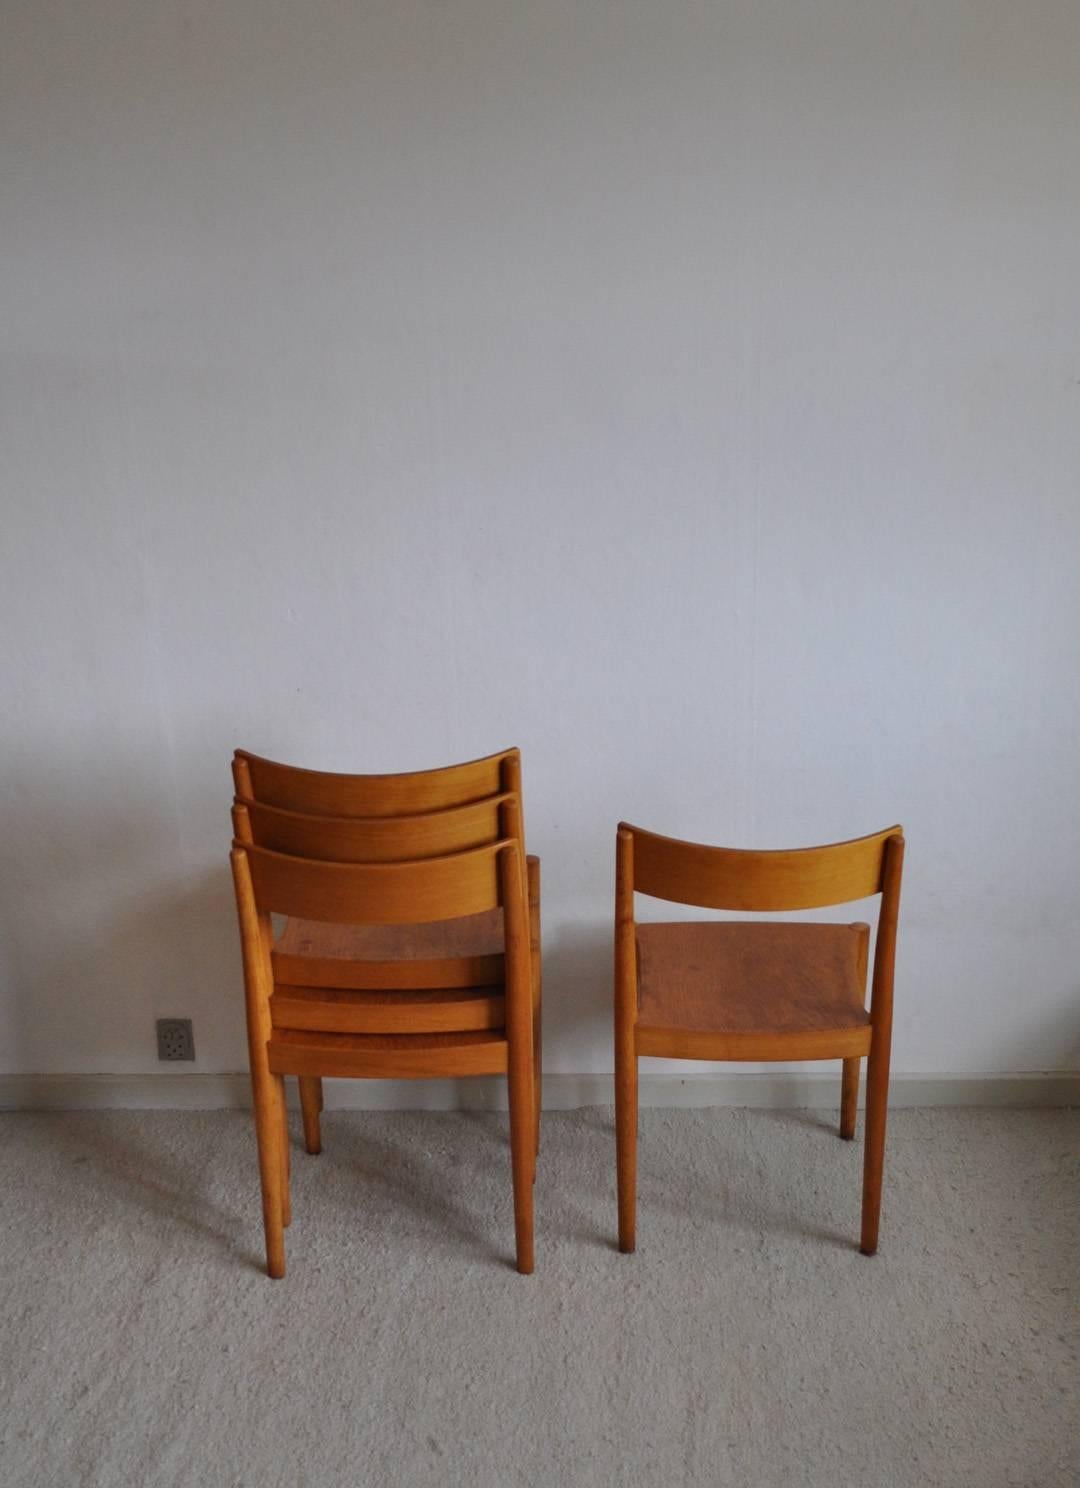 stockable chairs